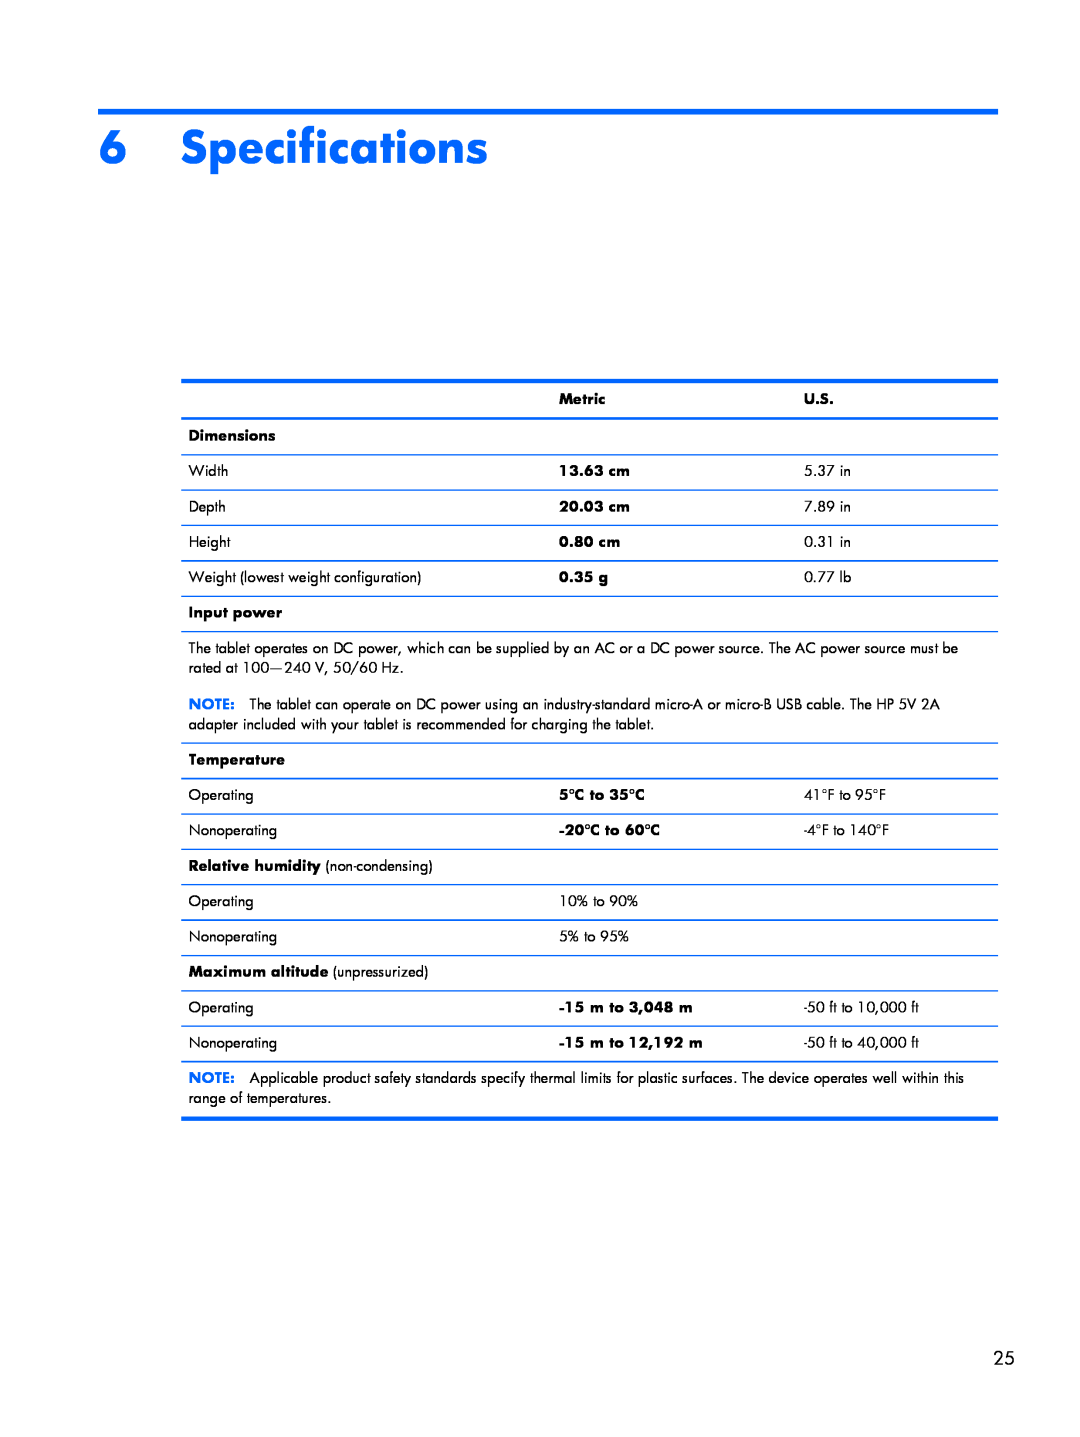 HP 8 1400 manual Specifications 